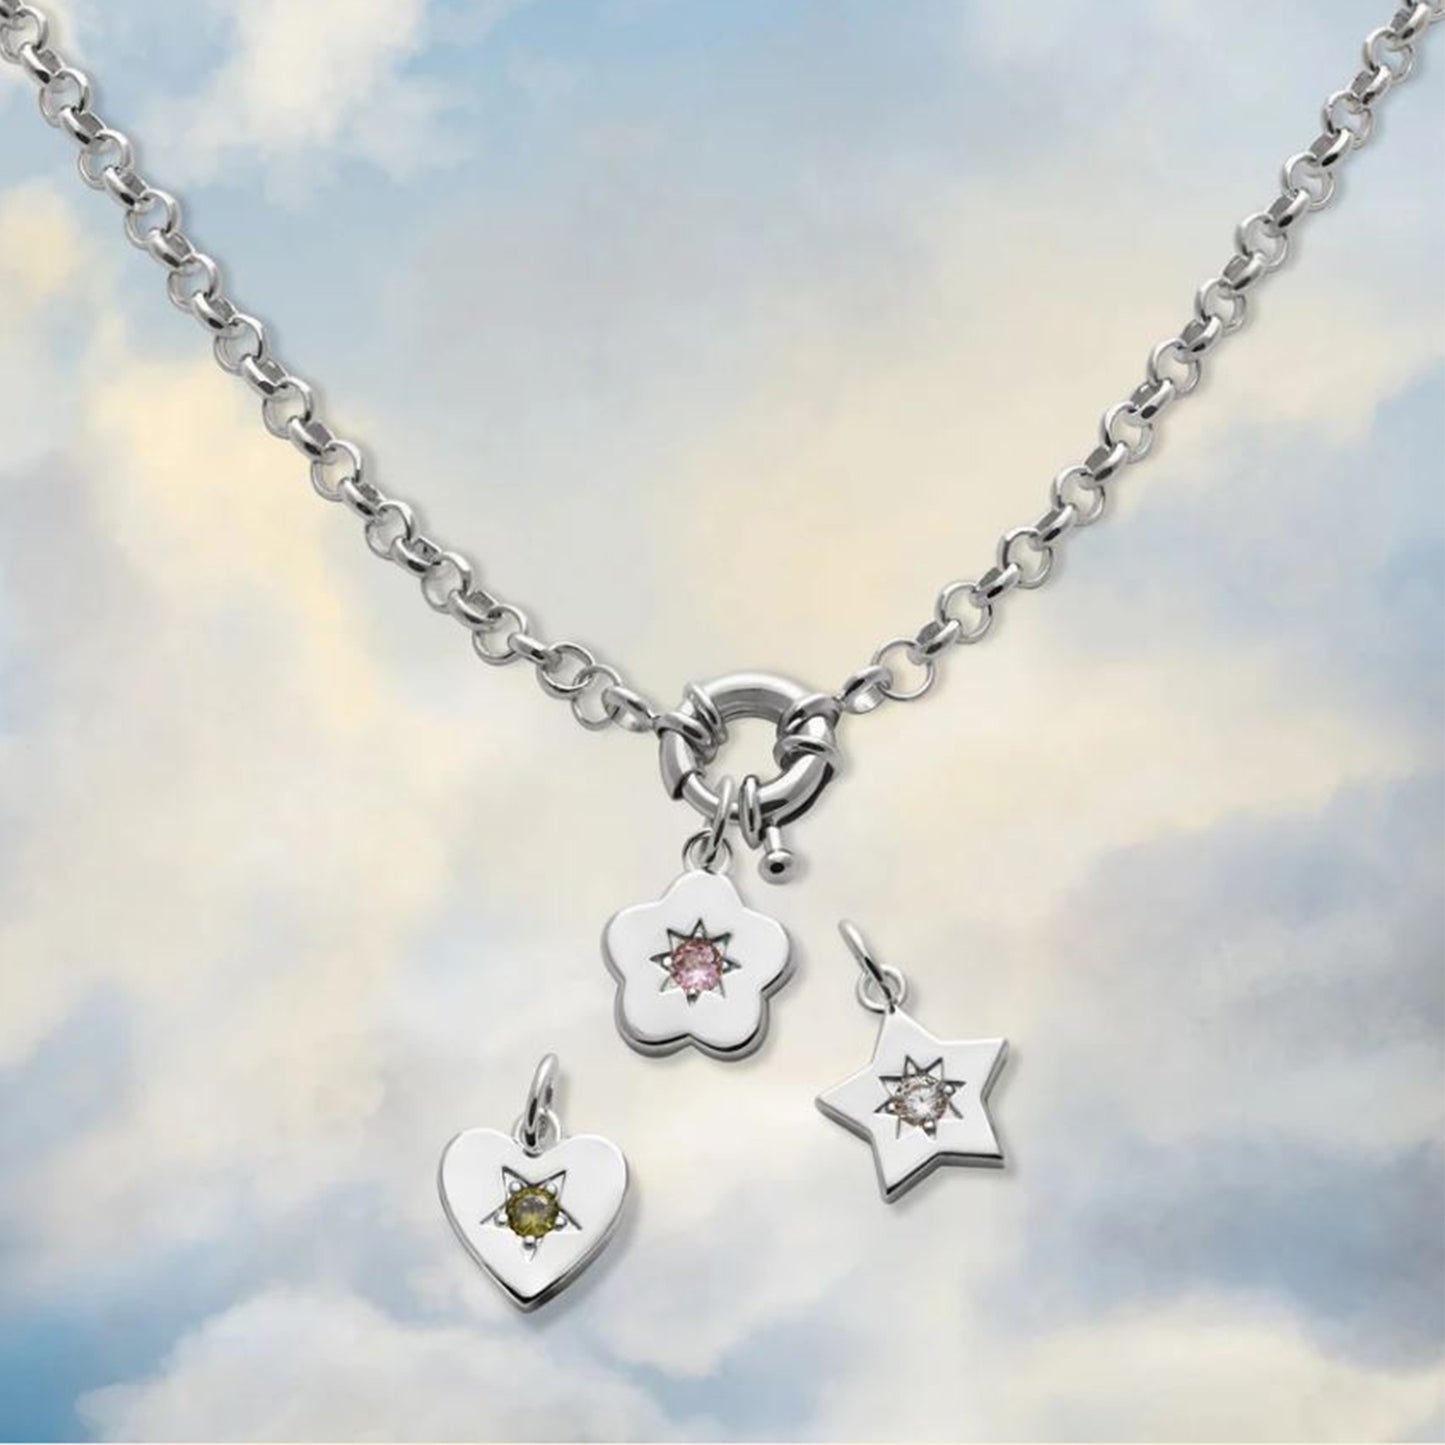 Silver Charm necklace with gemstones on a cloudy sky background